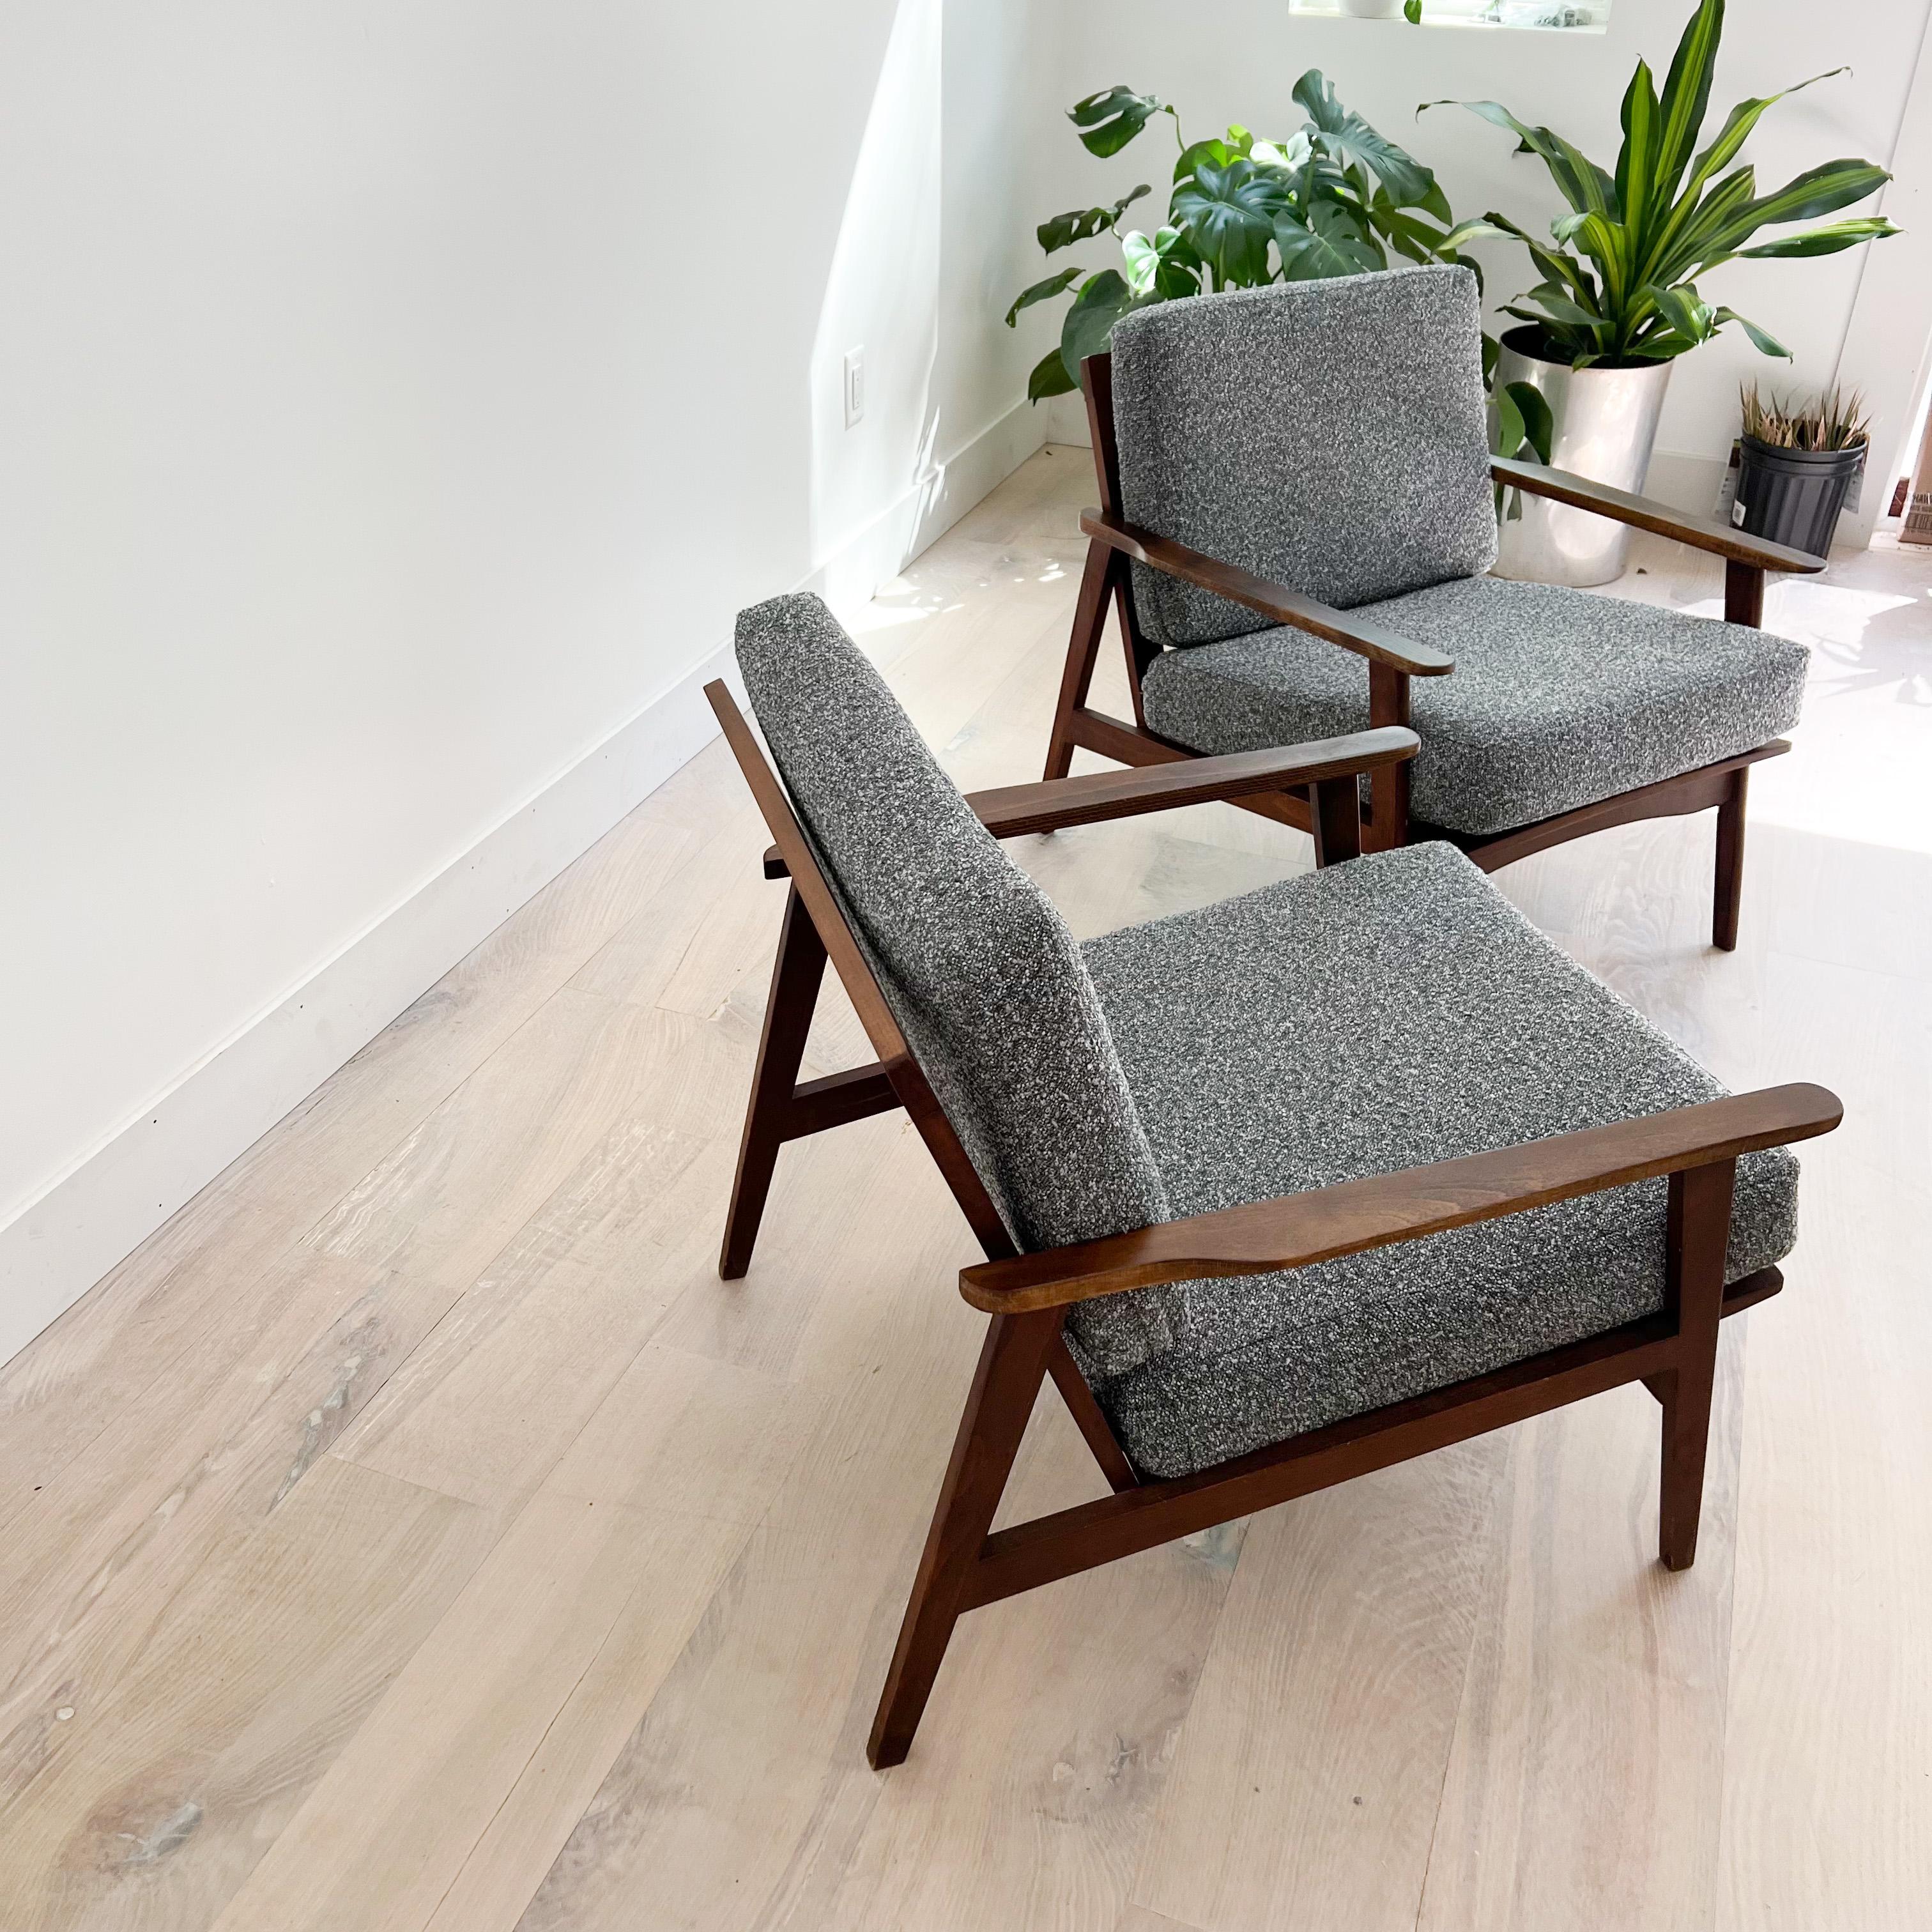 Pair of Mid-Century Lounge Chairs w/ New Grey Tweed Upholstery 2